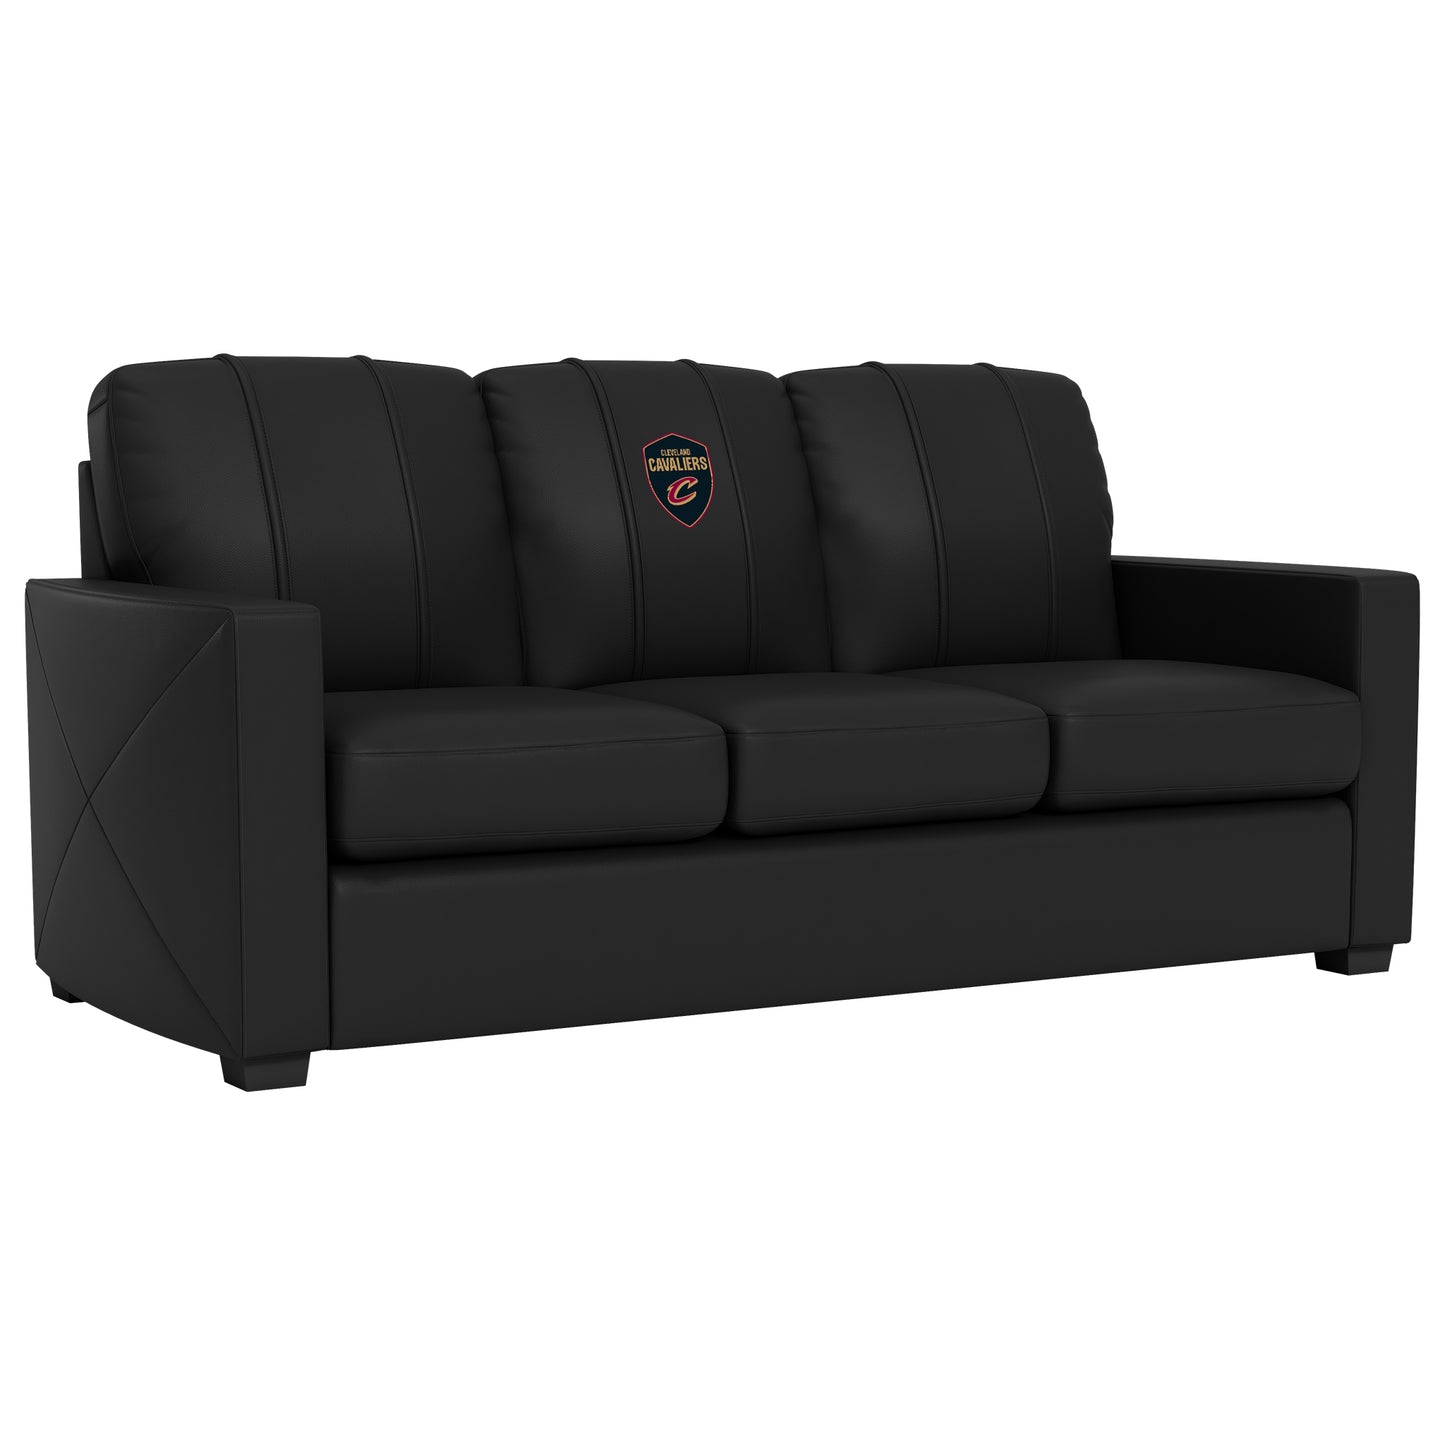 Silver Sofa with Cleveland Cavaliers Global Logo